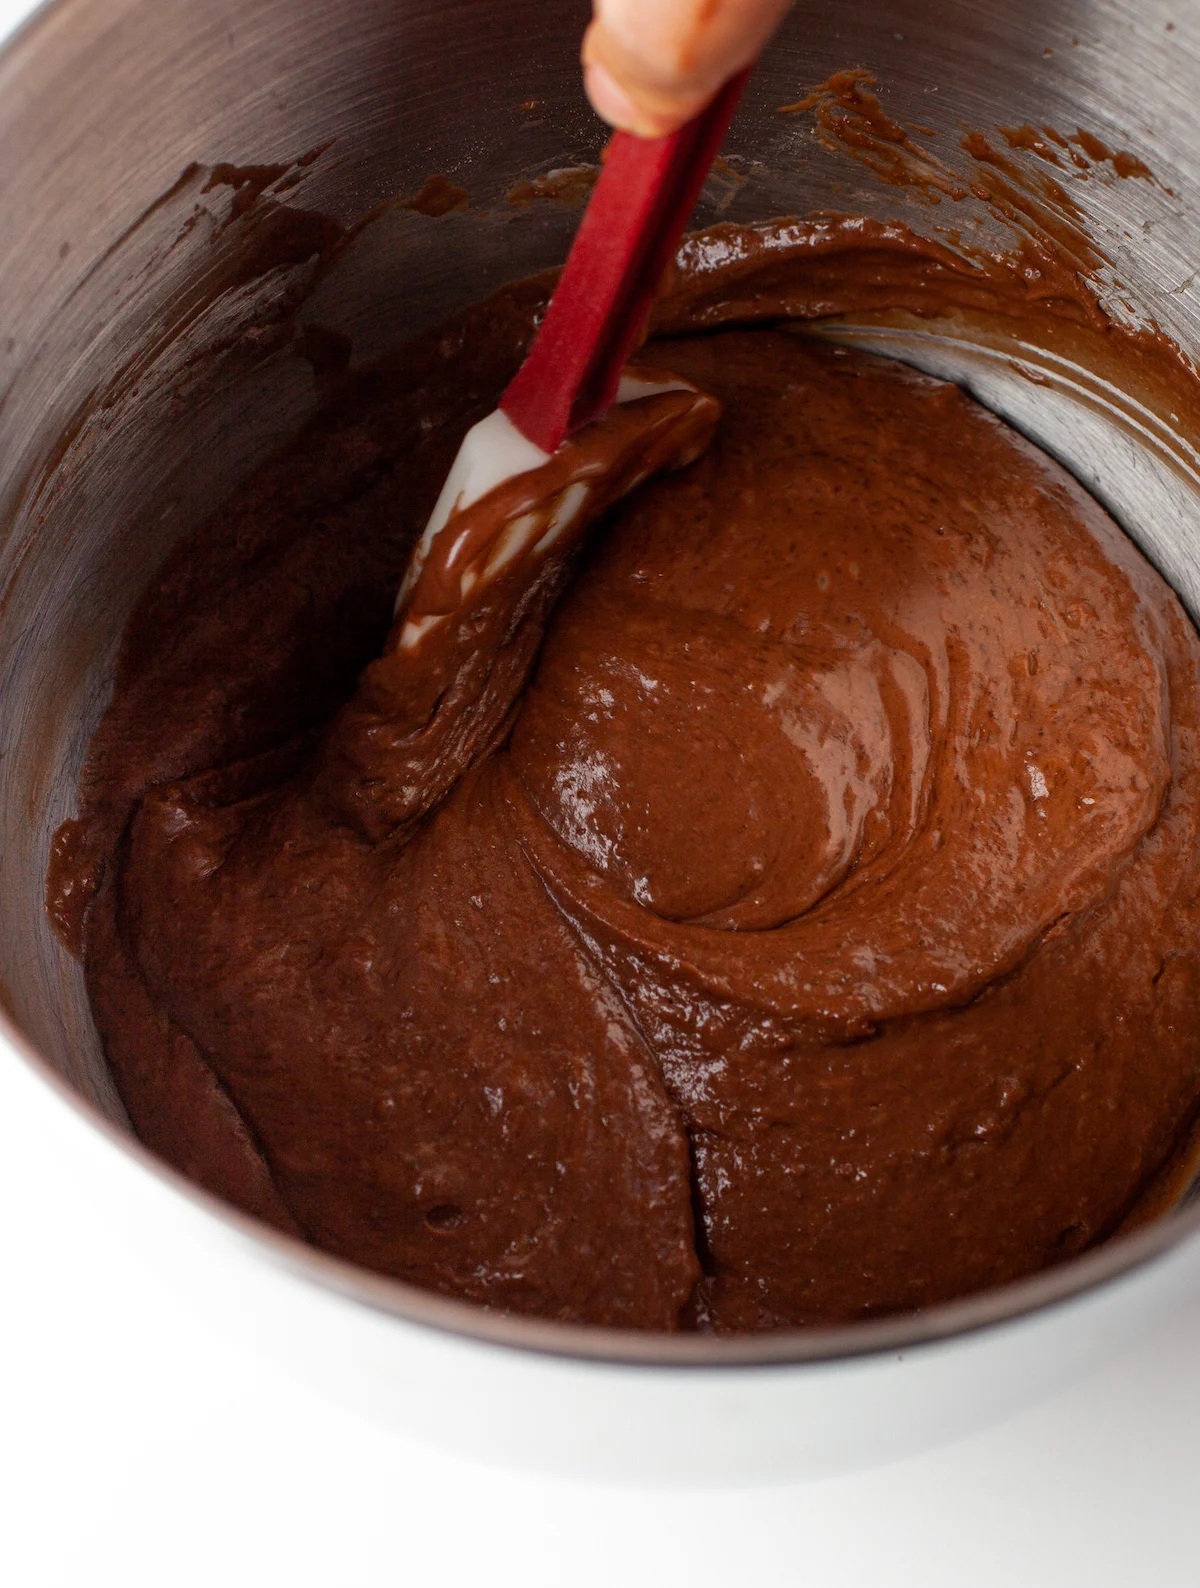 Scraping chocolate batter off the sides of a mixing bowl